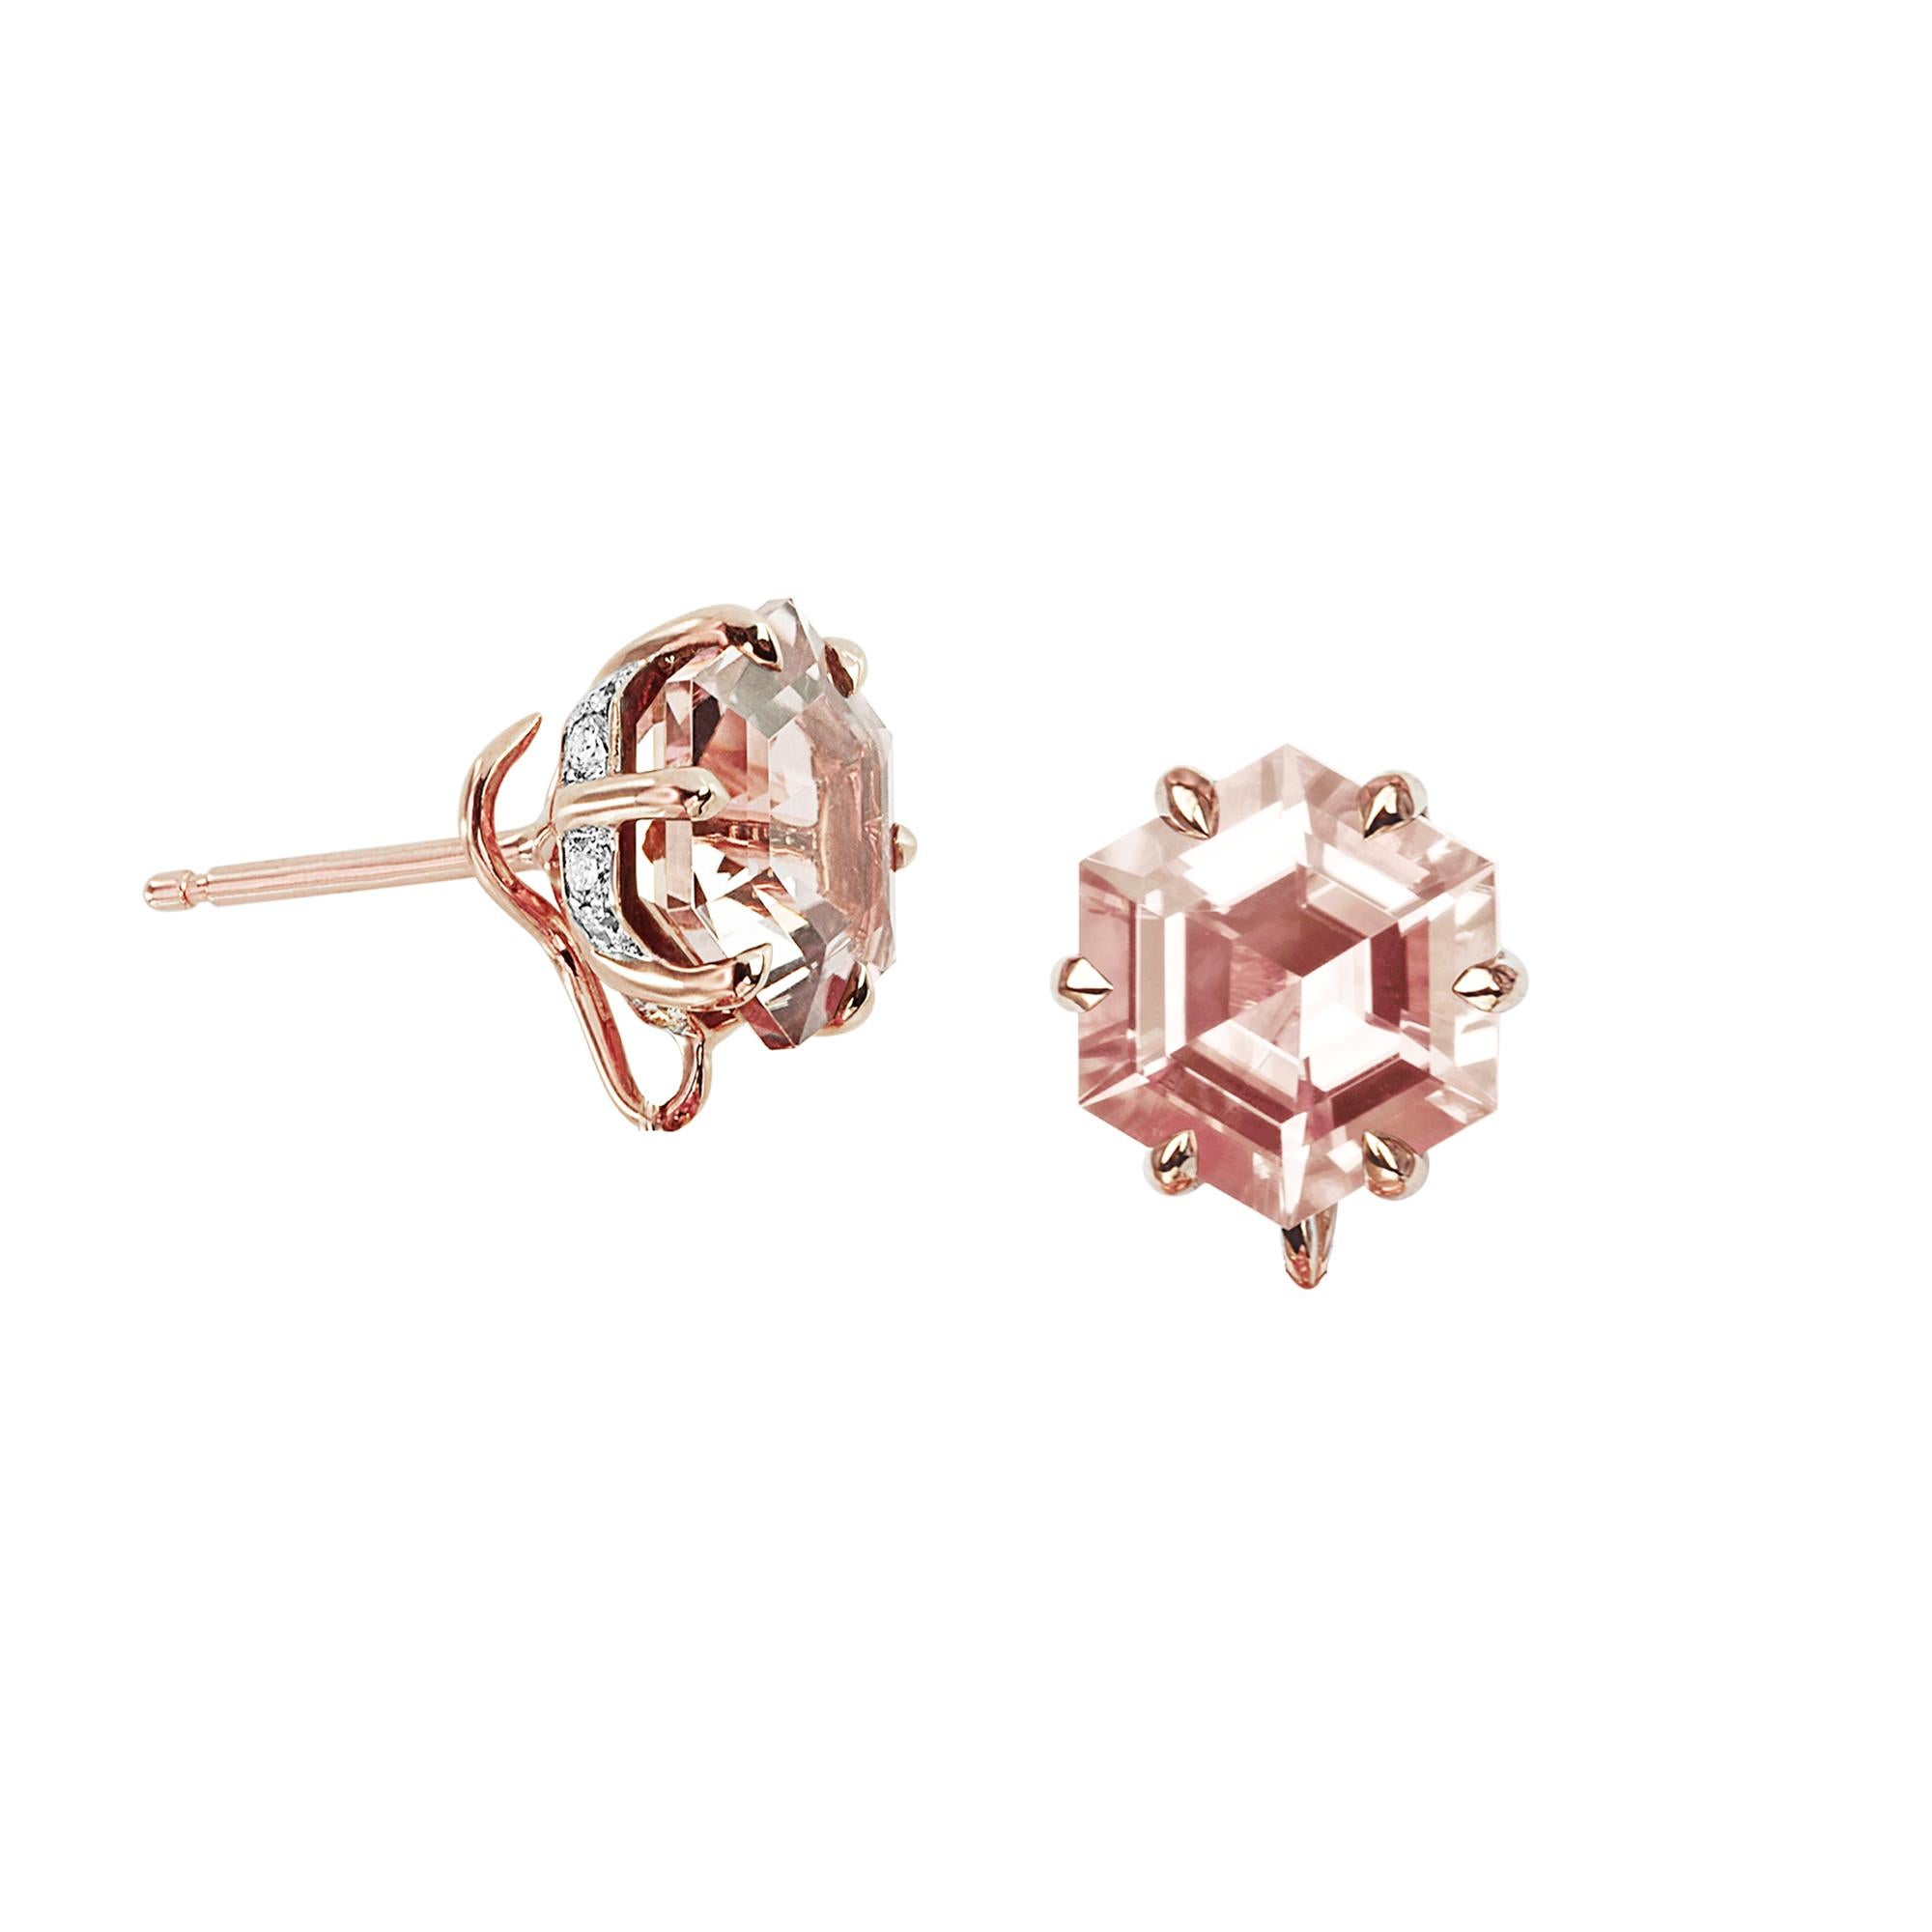 
One of a kind earrings with emerald-cut morganite and hexagonal-shape prosecco tourmalines set in 18 karat rose gold and pave-set round, brilliant diamond detailing. 

Earrings feature invisible hook with detachable pendants allowing you to wear